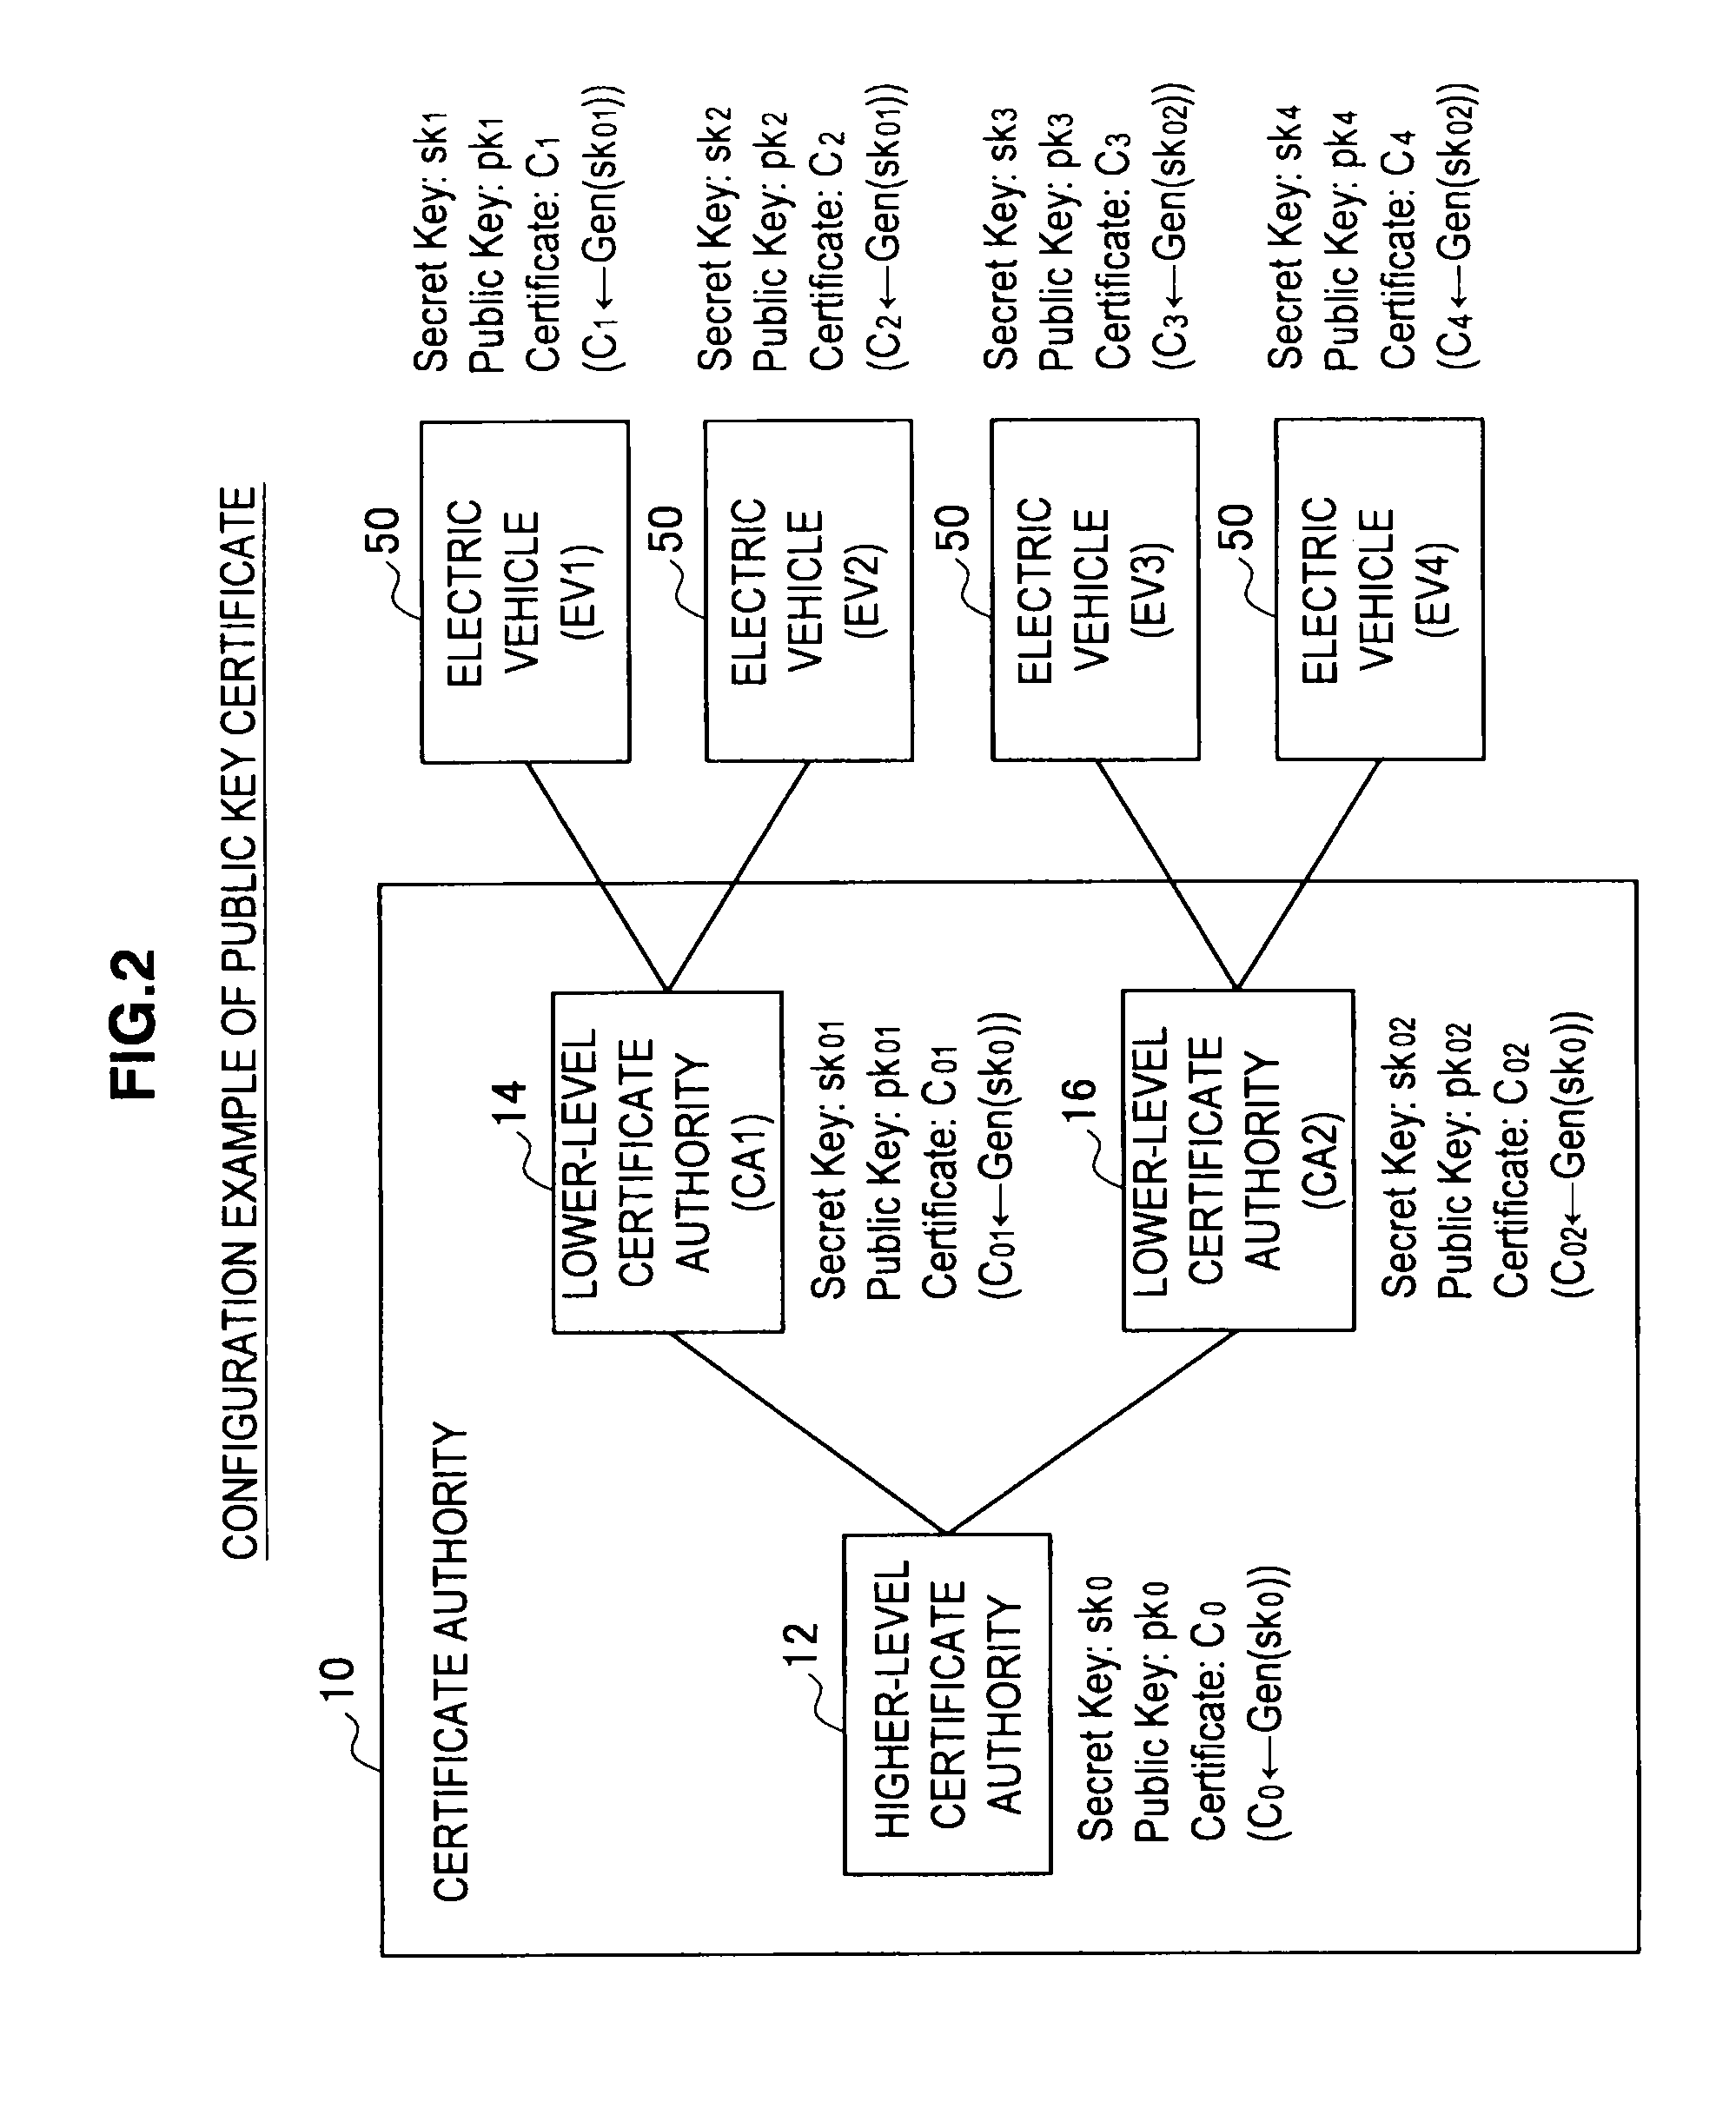 Electric vehicle, management apparatus, and drive management method